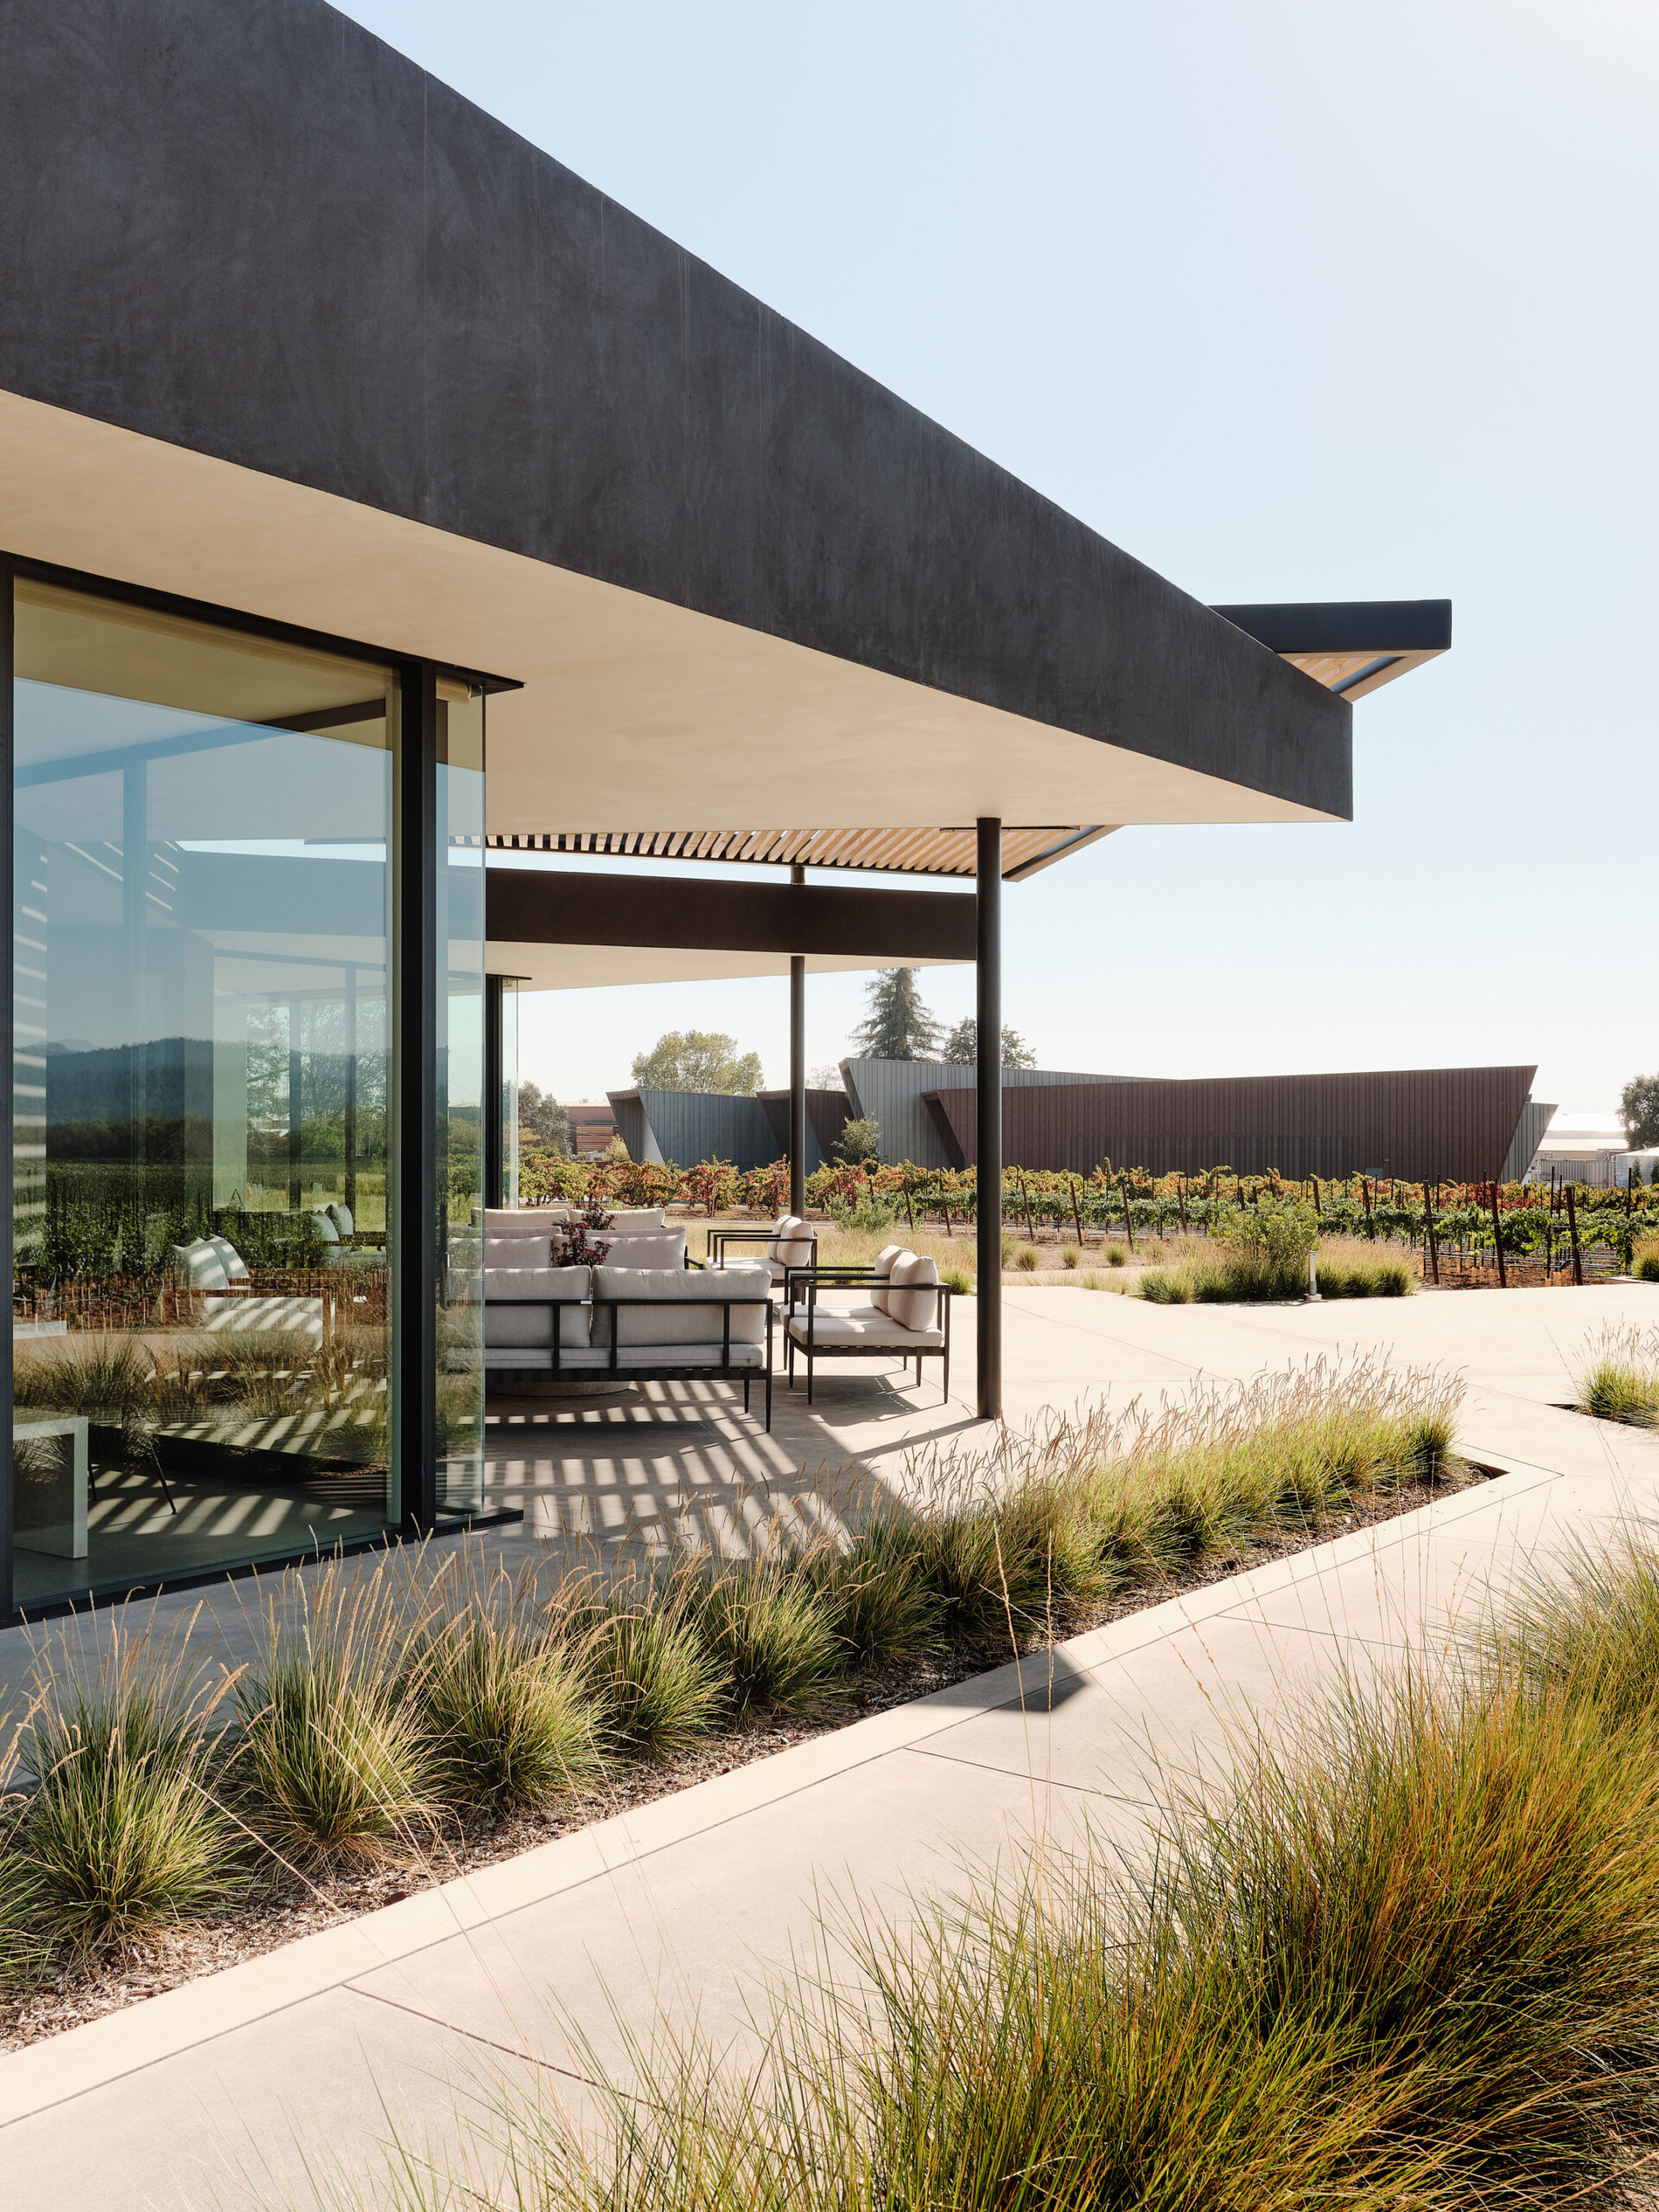 Outdoor view of the Aperture Cellars tasting room